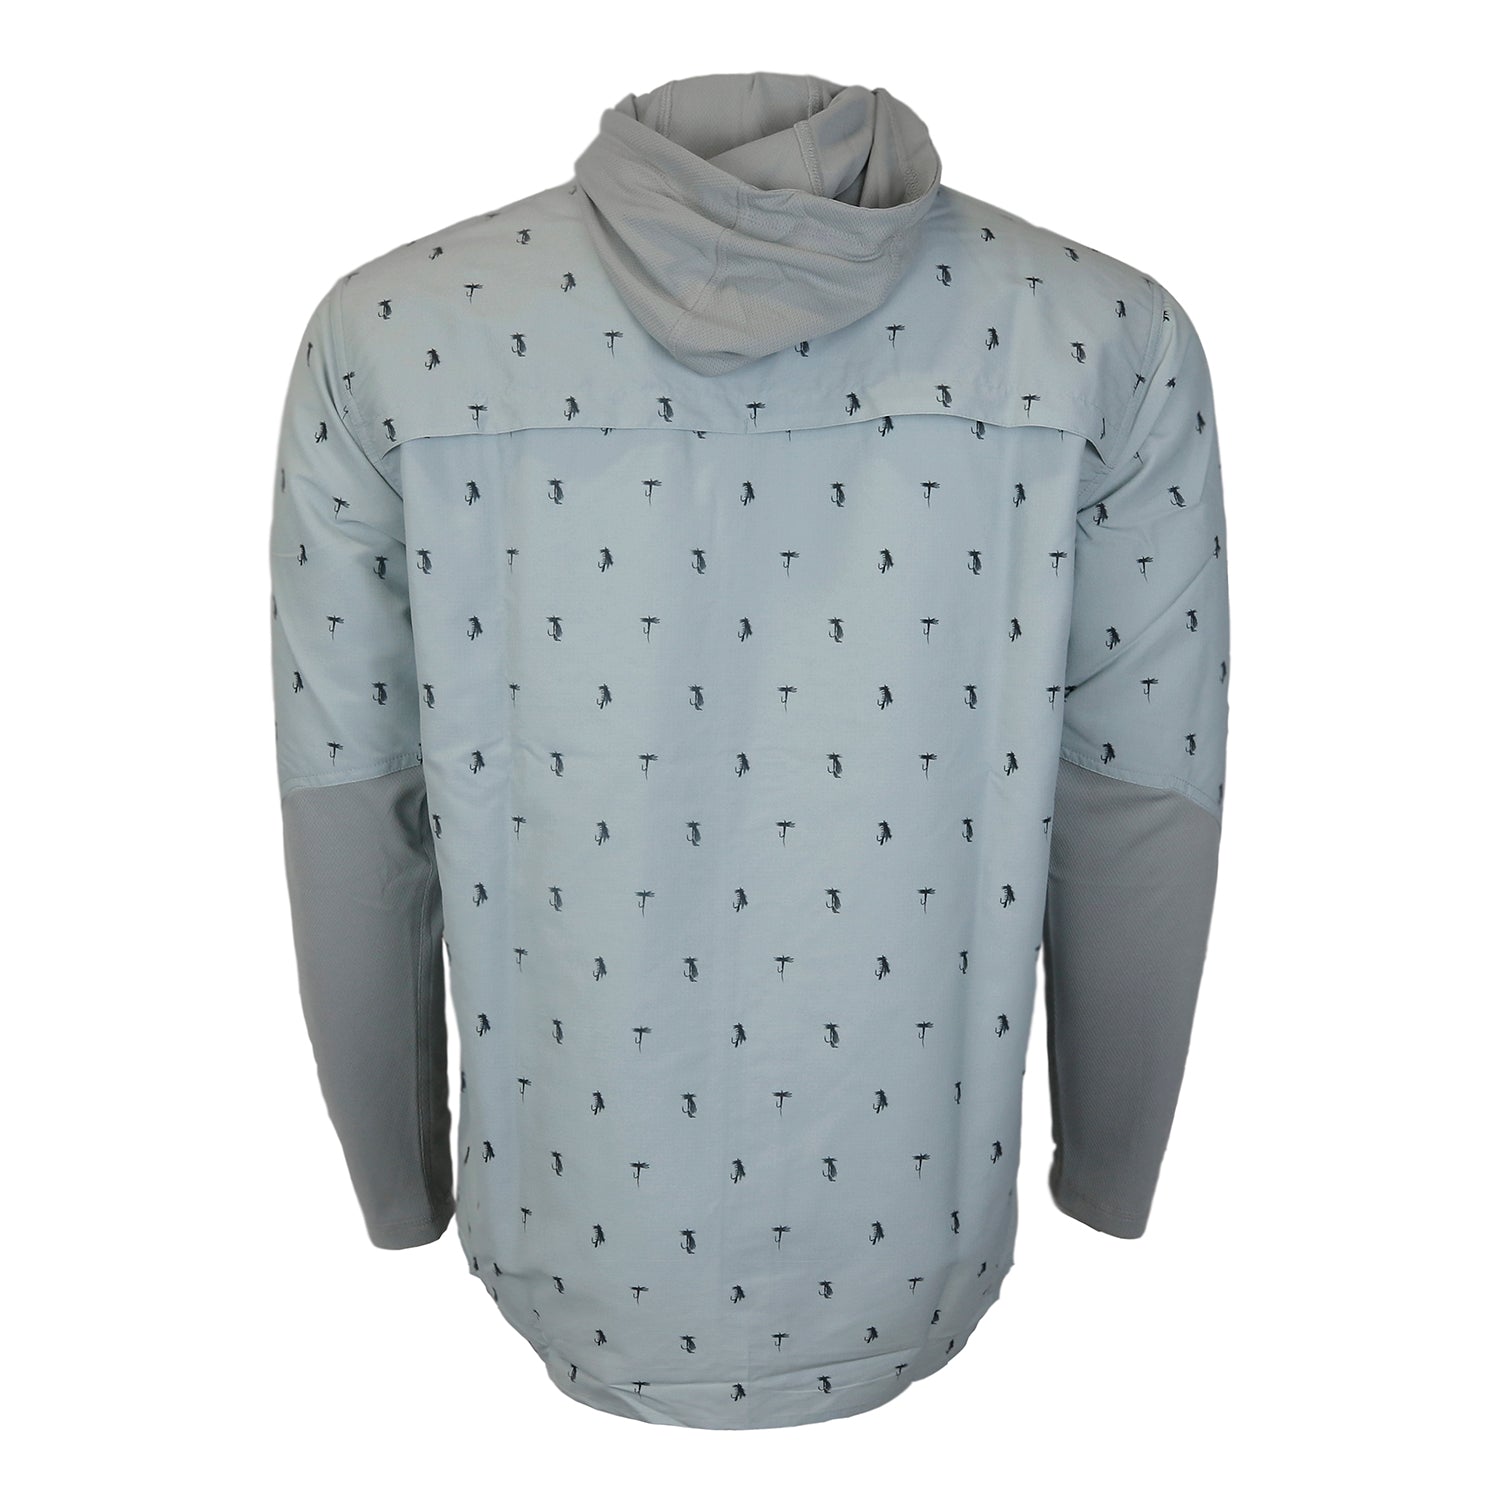 The back view of a button up, light gray shirt with crew sleeves, a collar and a hood. The shirt has small dark gray dry flies printed all over it except for the crew sleeves.